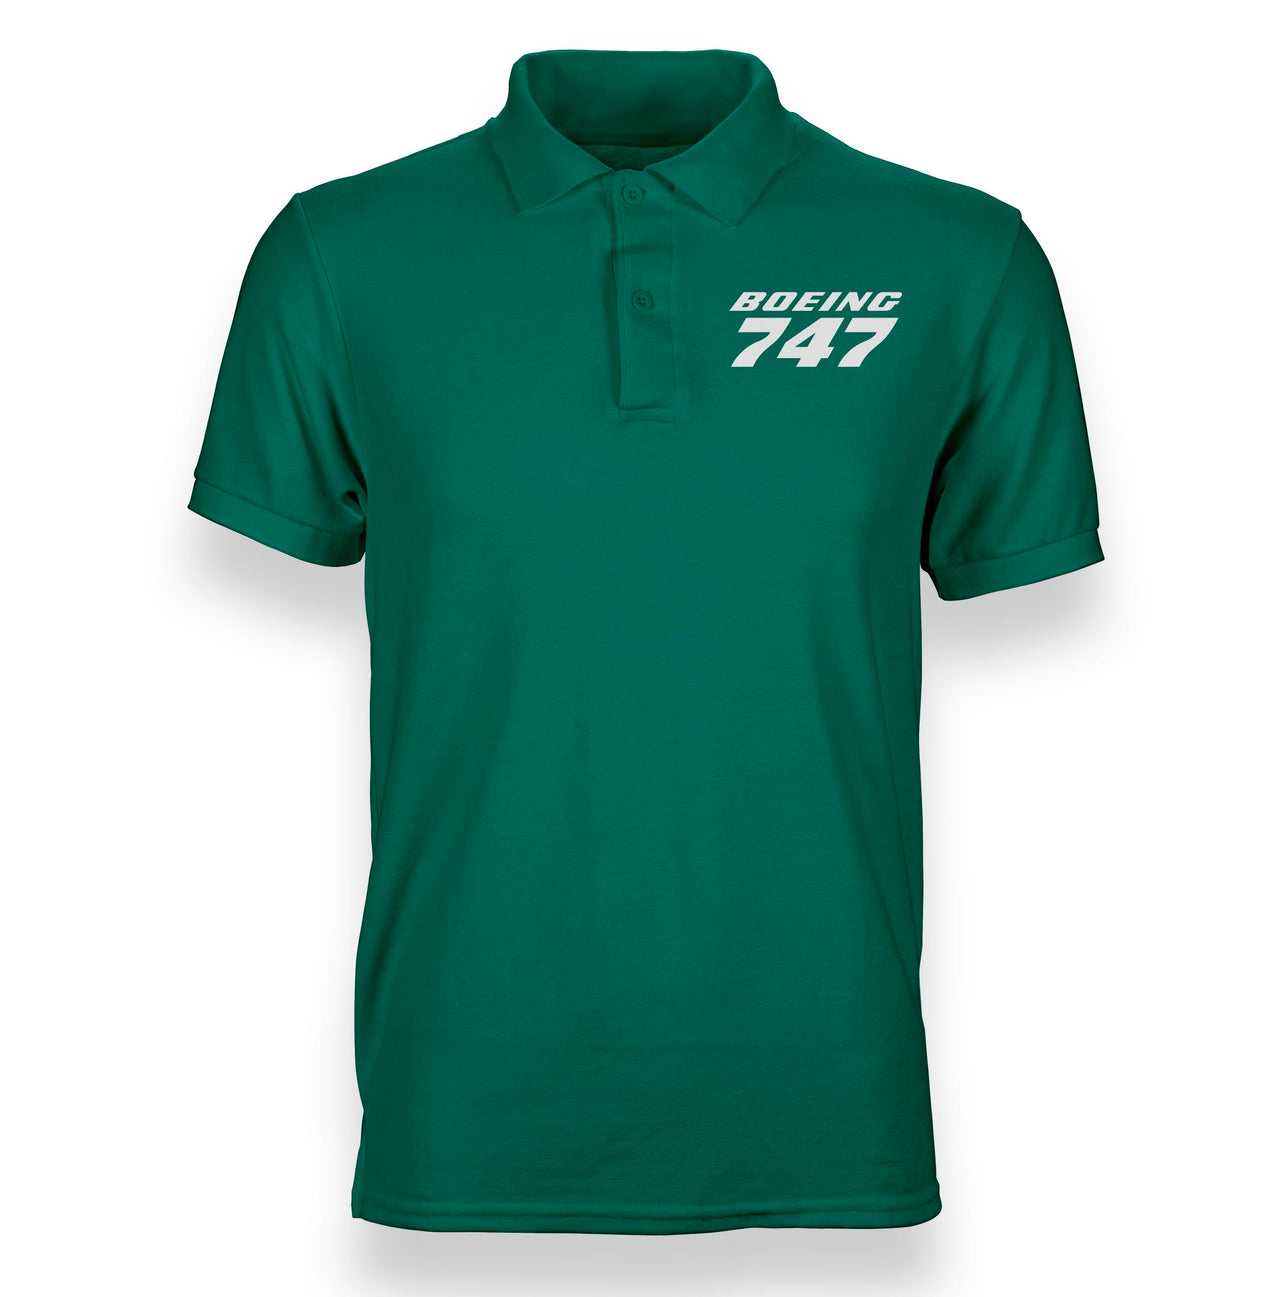 Boeing 747 & Text Designed Polo T-Shirts